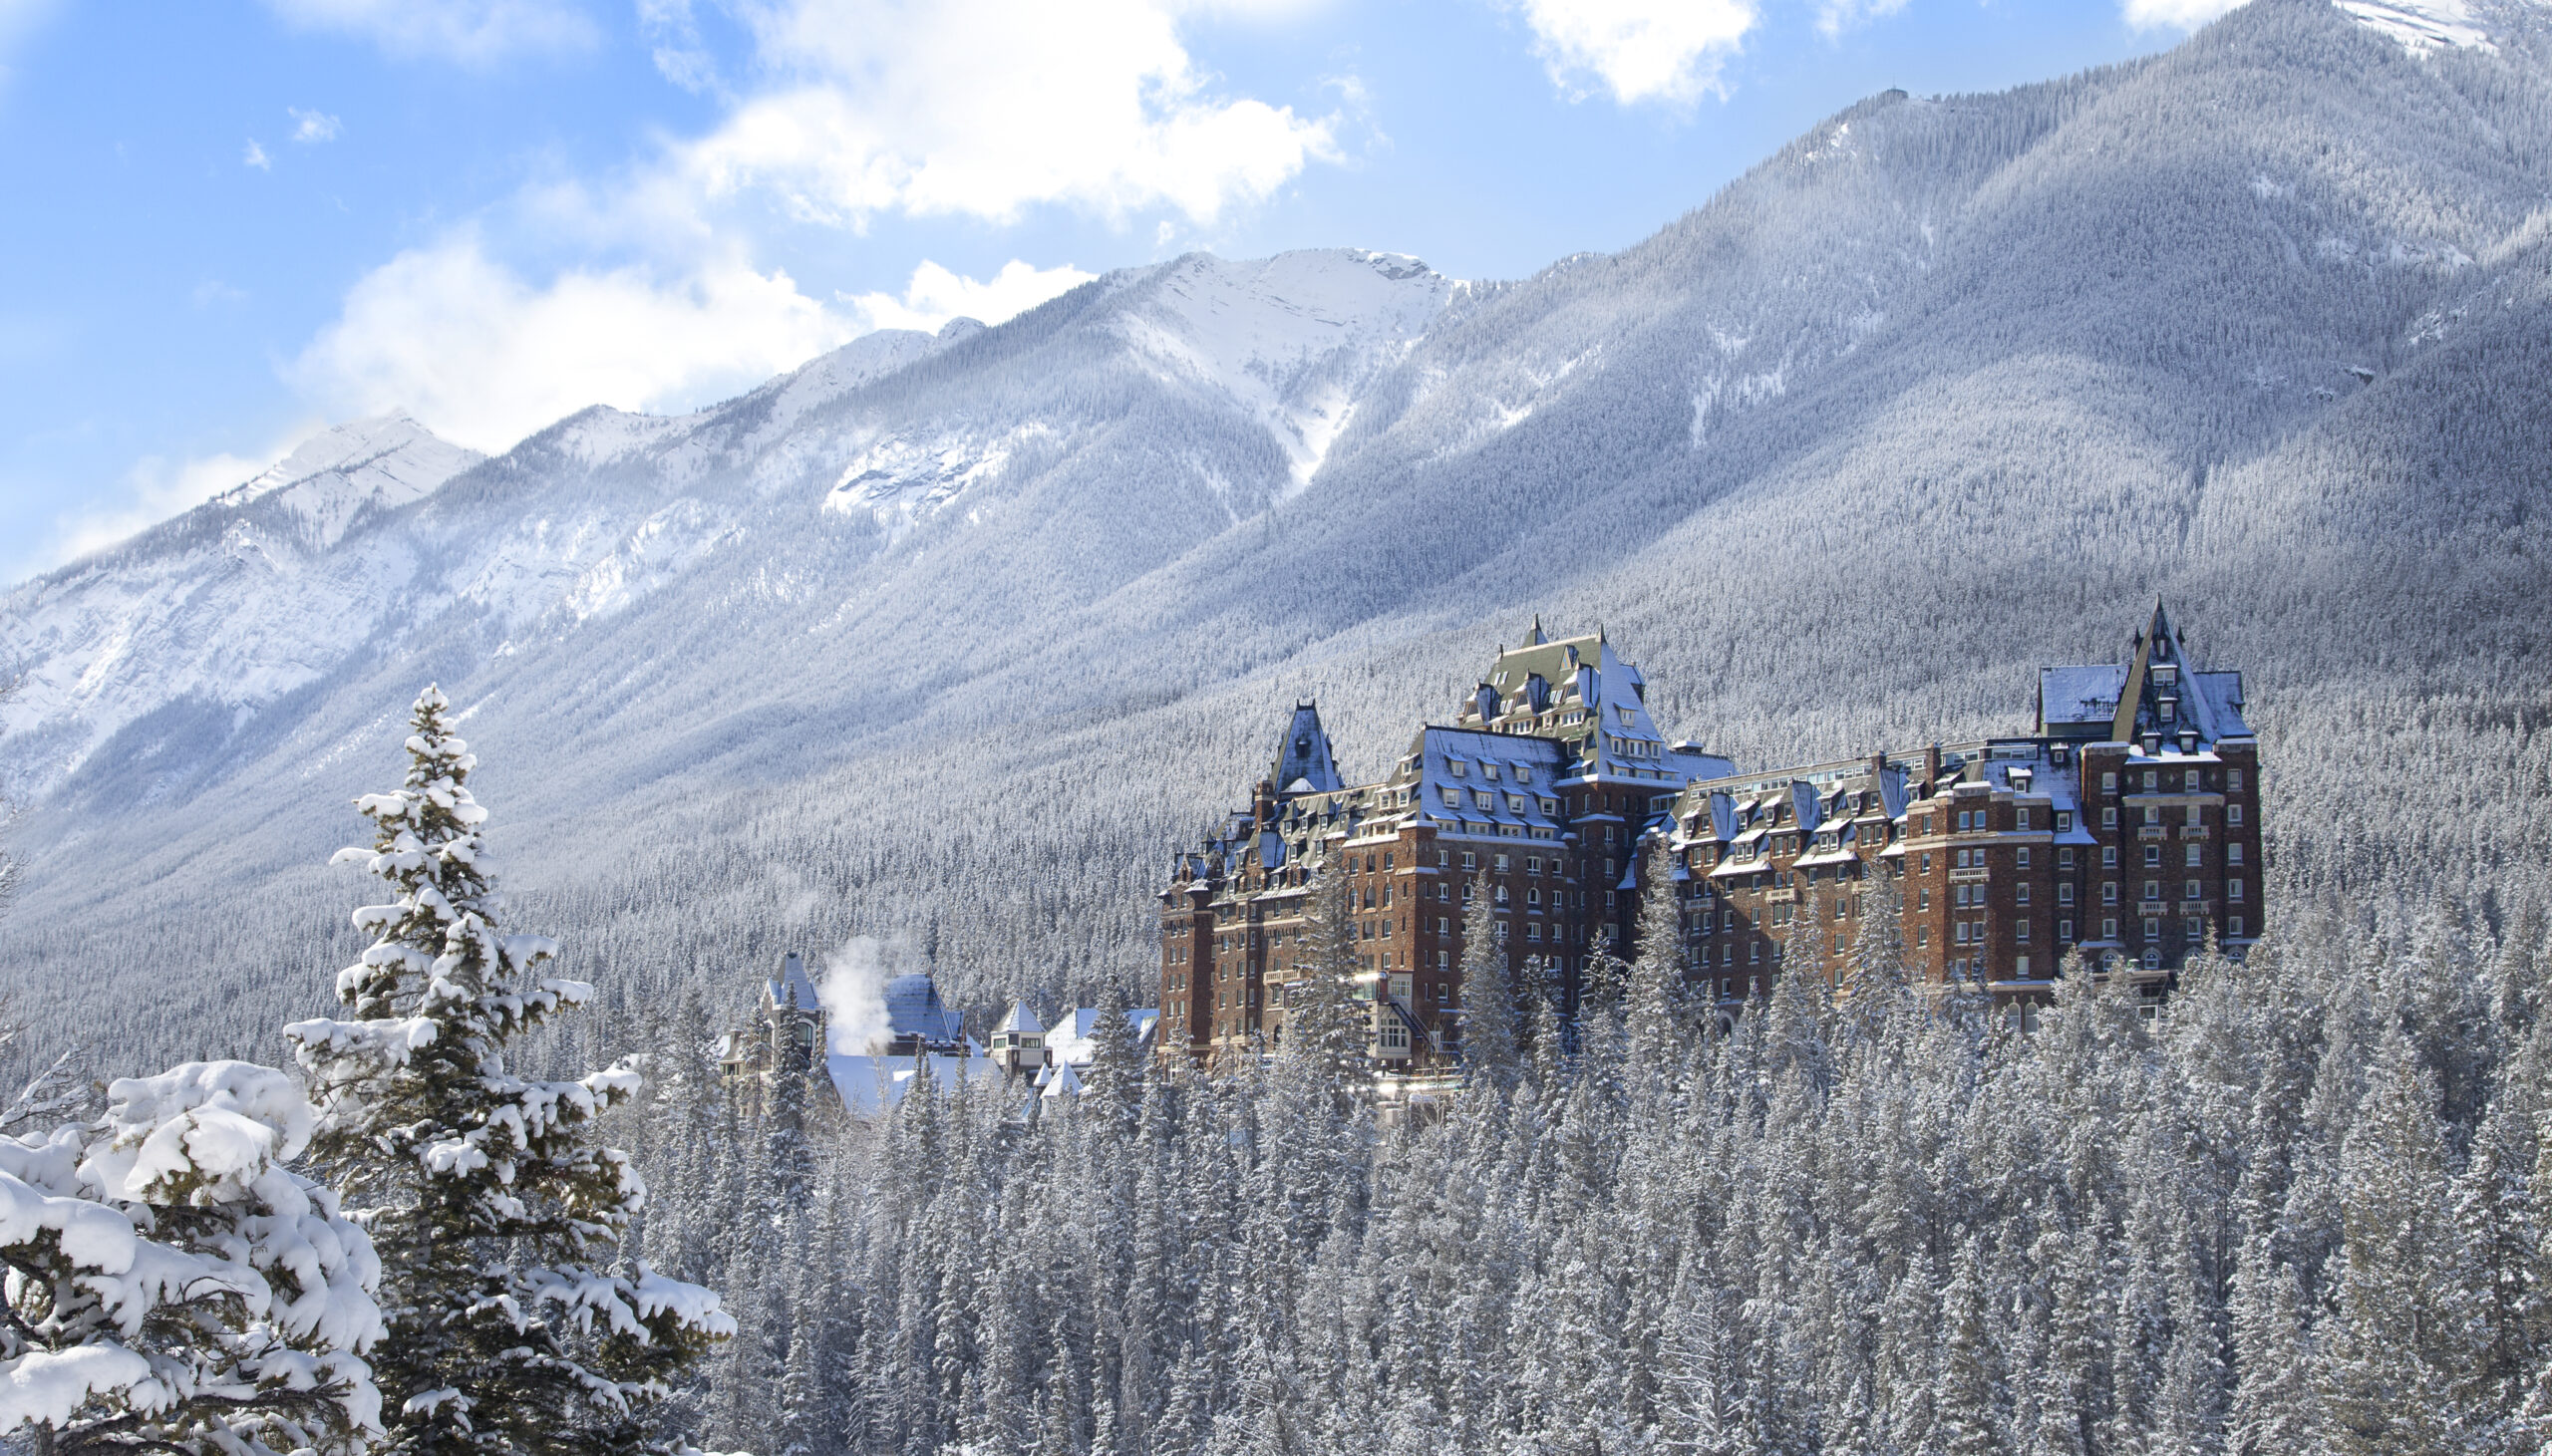 5 Luxury Resorts Inspiring Couples to Celebrate Valentine's Day with Memorable Experiences - The Fairmont Banff Springs